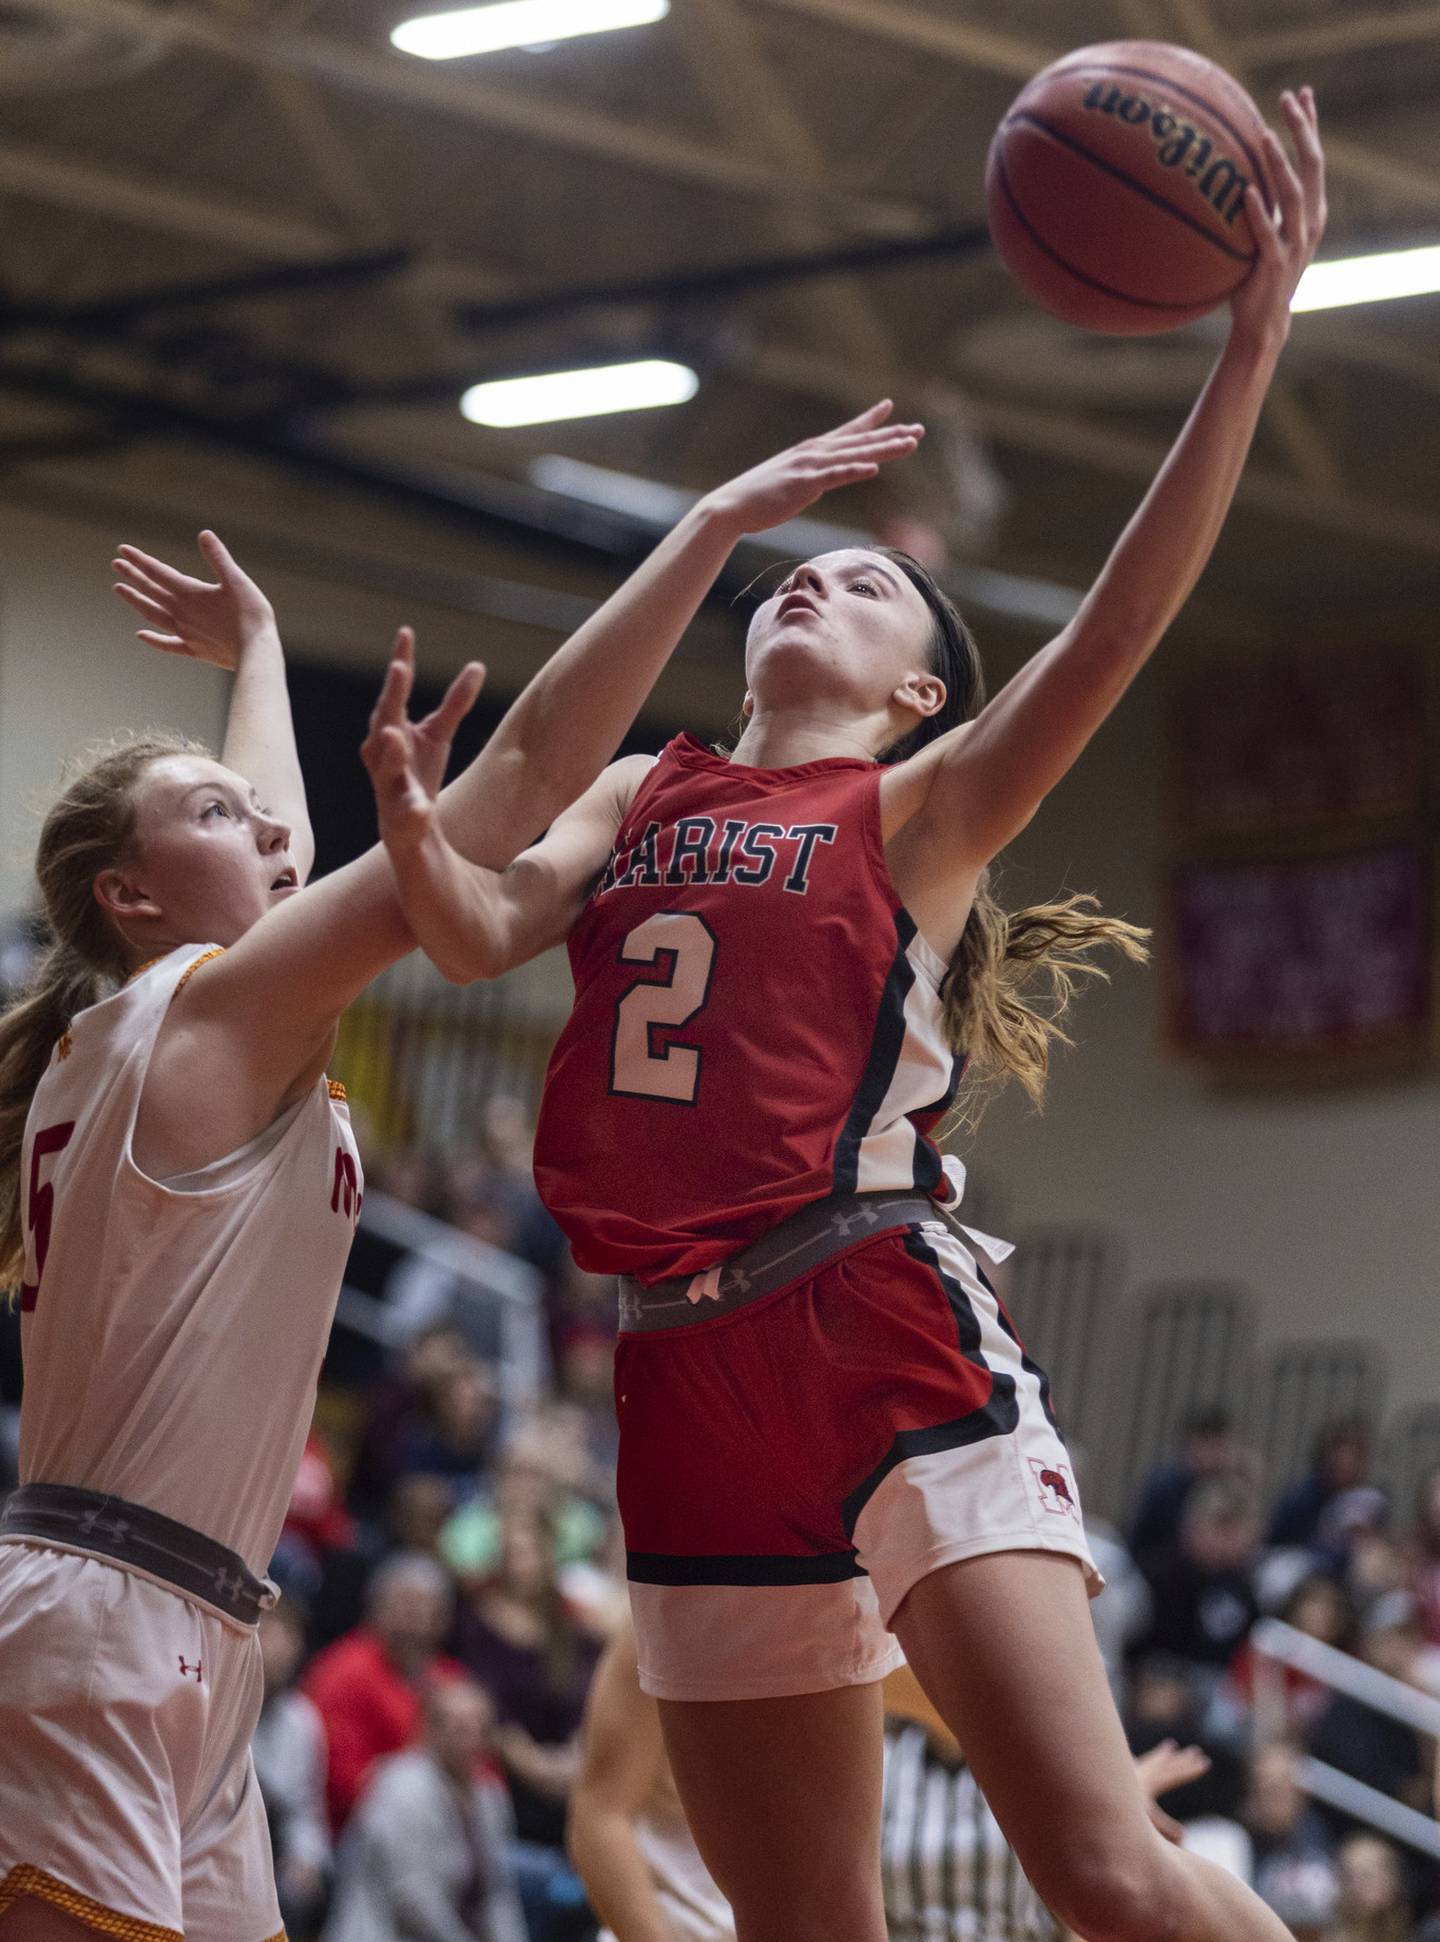 Marist’s Elise Ward (2) works a hook shot over Mother McAuley's Morgan Feil (5) in overtime of a nonconference game in Chicago on Thursday, Dec. 8, 2022.